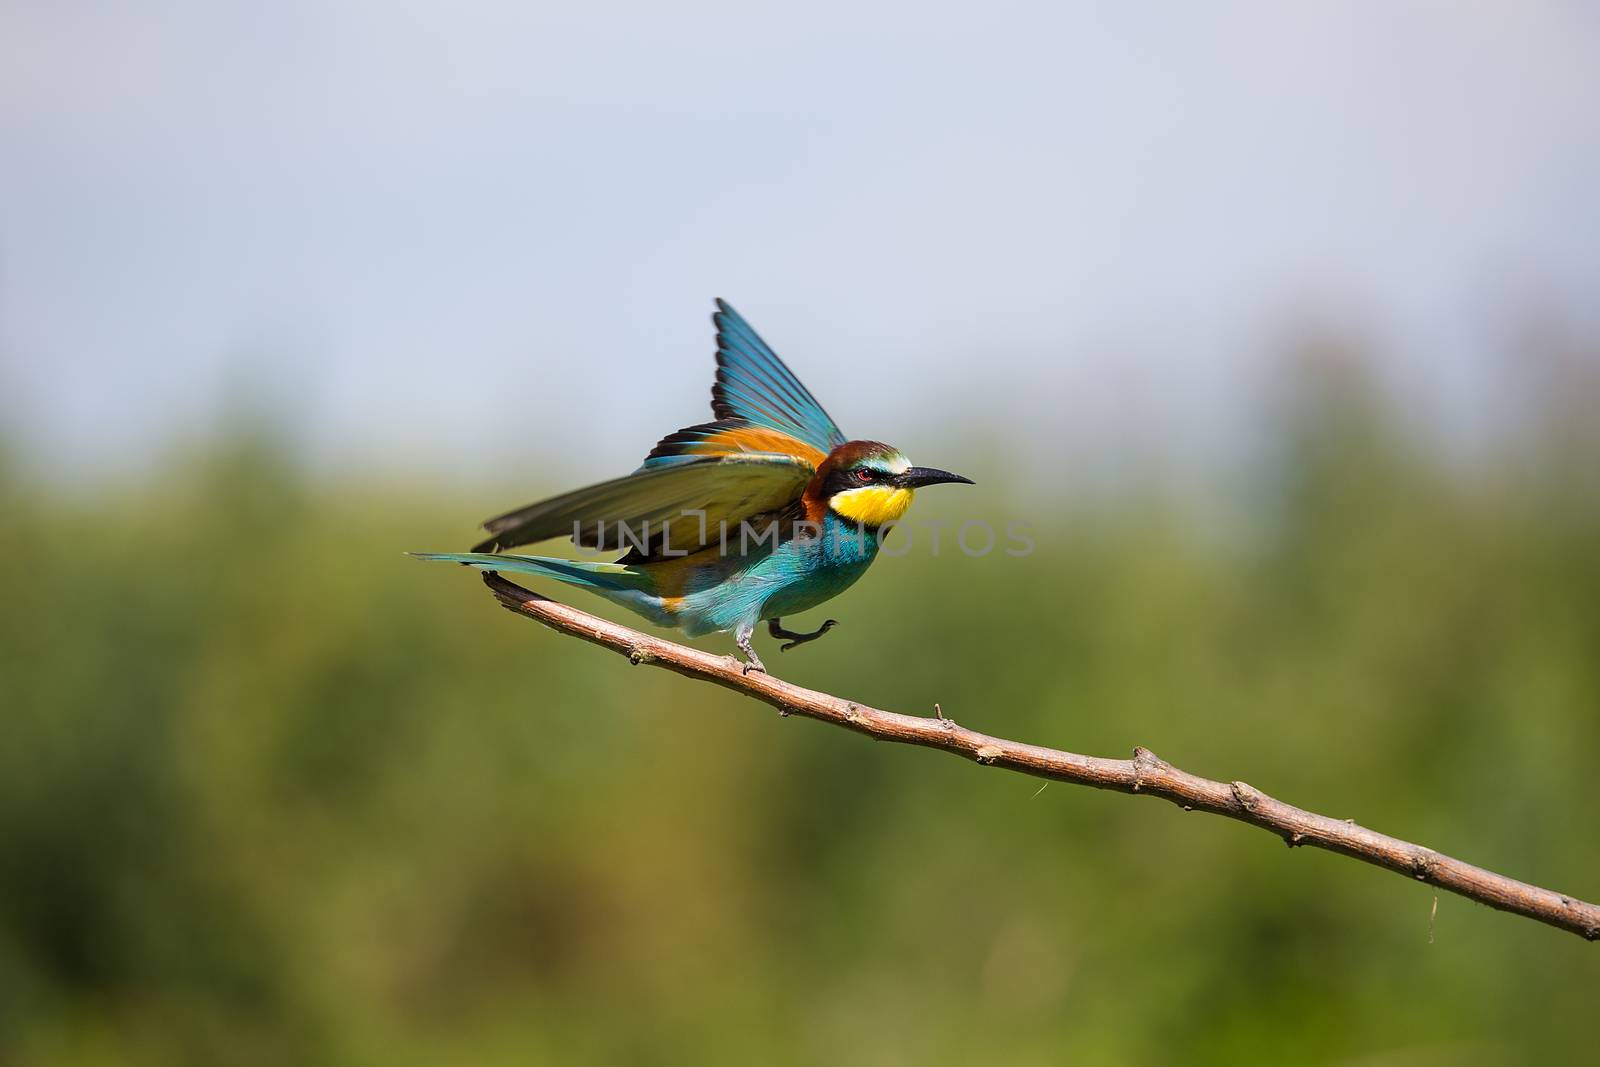 European Bee-eater (Merops apiaster) flying on brunch - tropical colours bird, Isola della Cona, Monfalcone, Italy, Europe